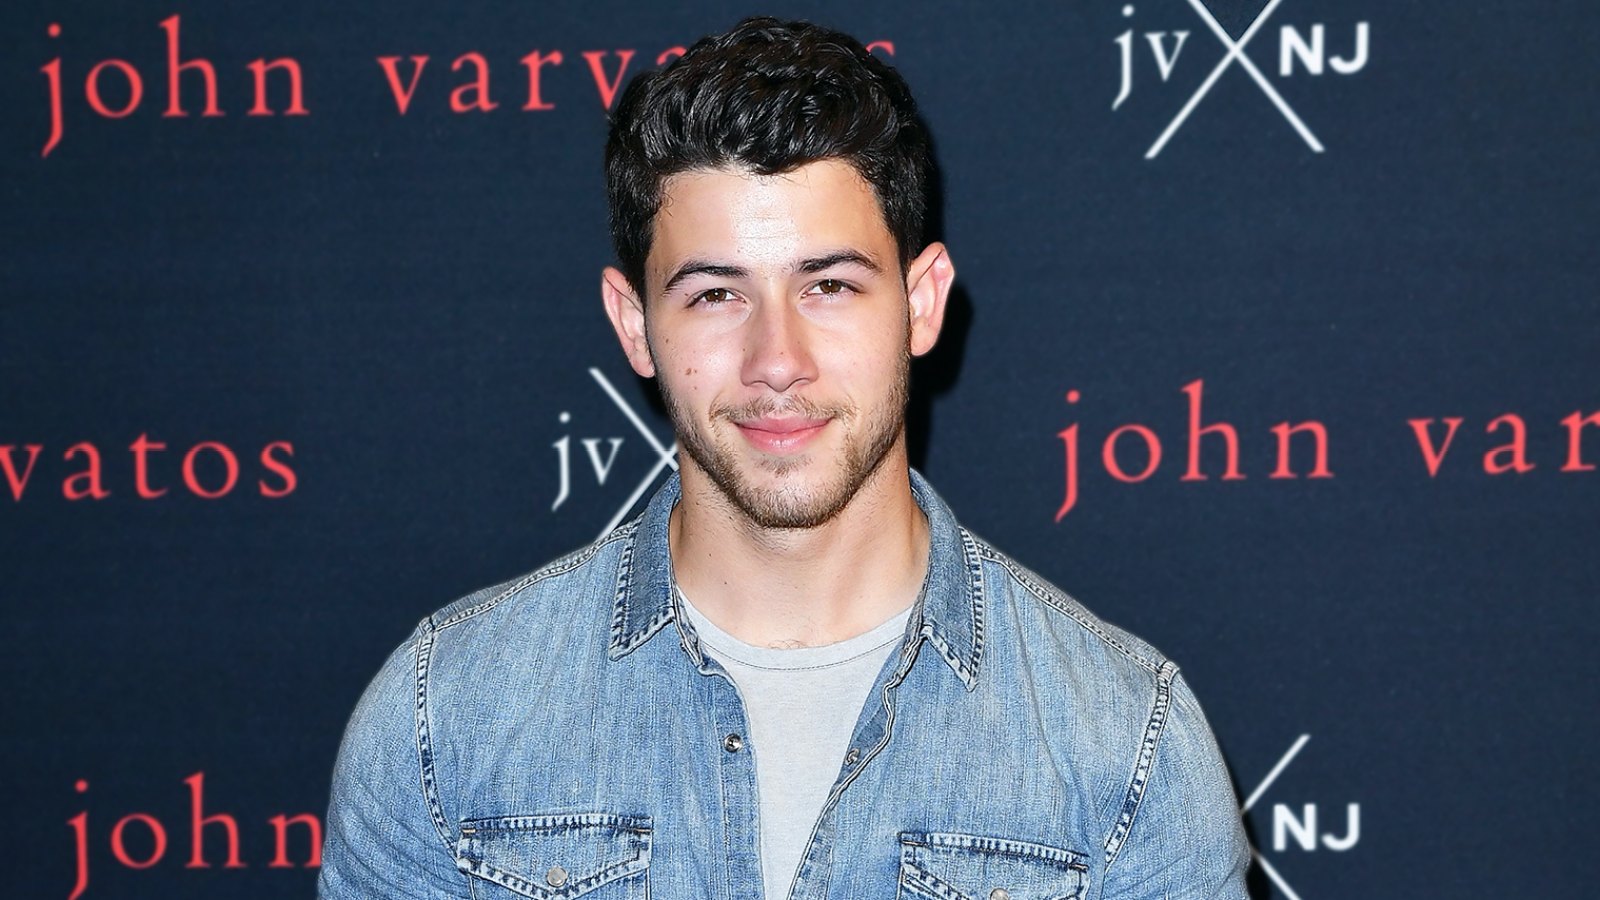 Nick Jonas attends the launch of his new fragrance collaboration JVxNJ with US designer John Varvatos in New York City on August 8, 2018.